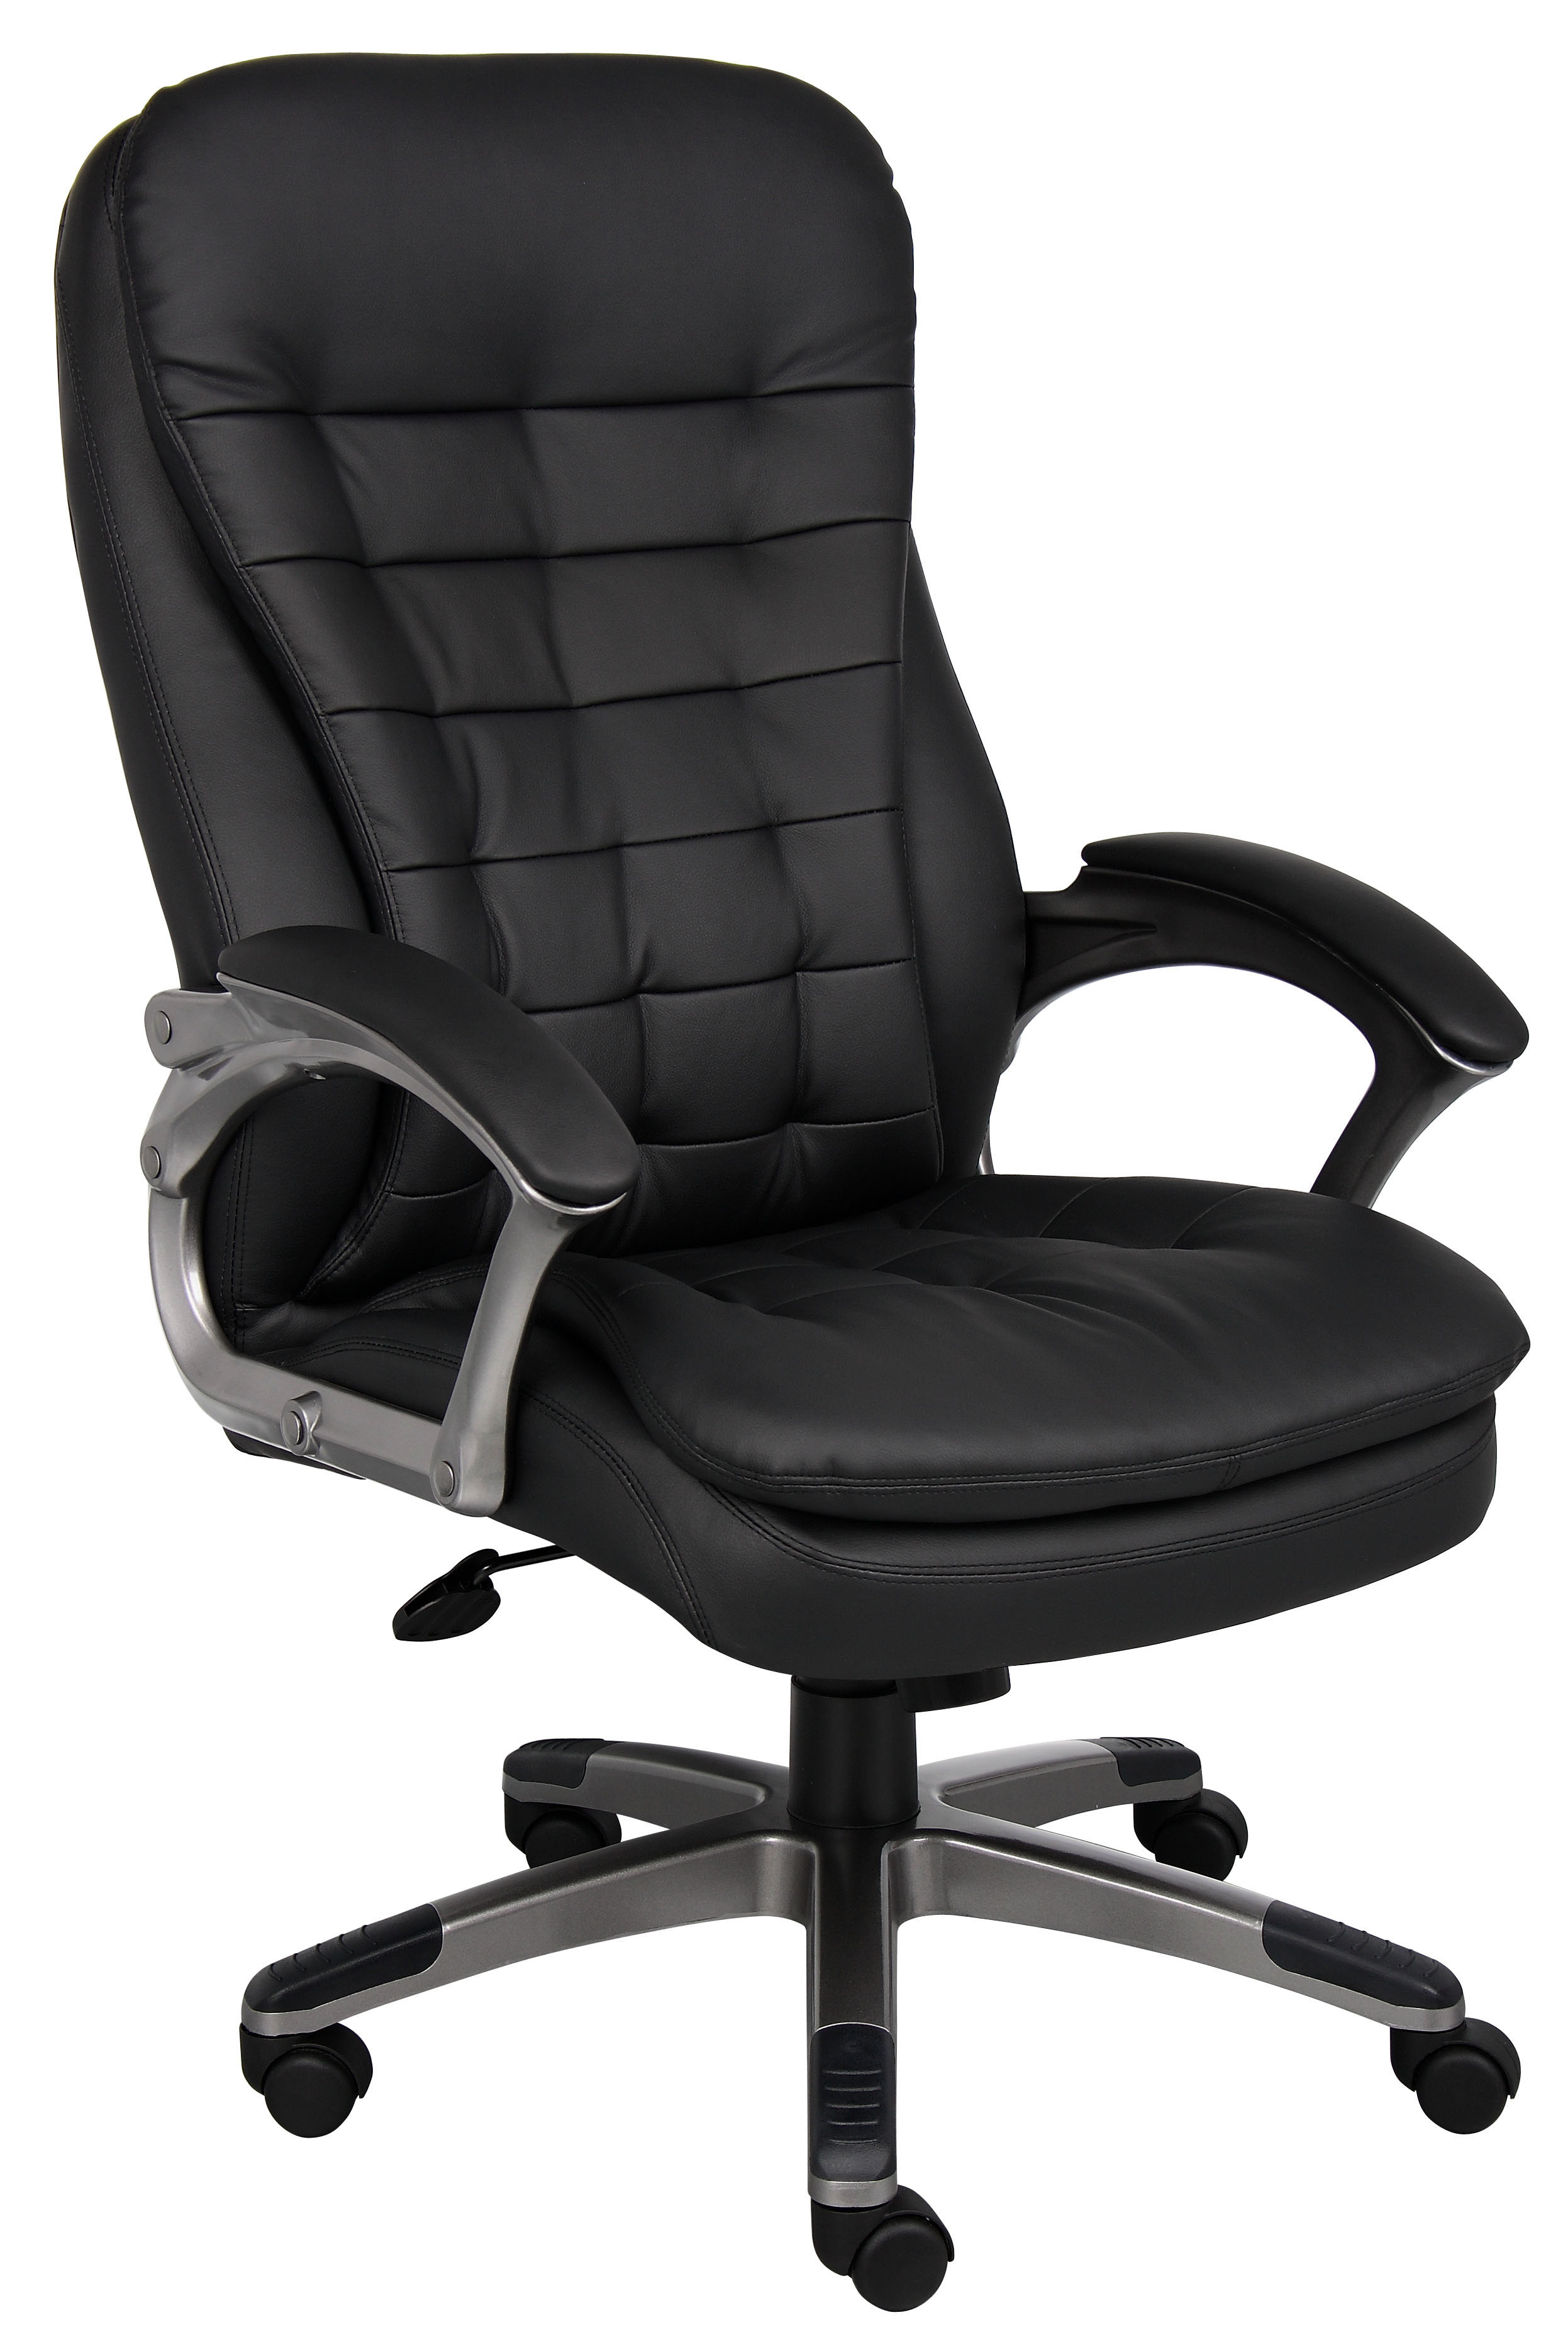 Boss Office Products Executive High Back Pillow Top Office Chair in Black - image 1 of 9